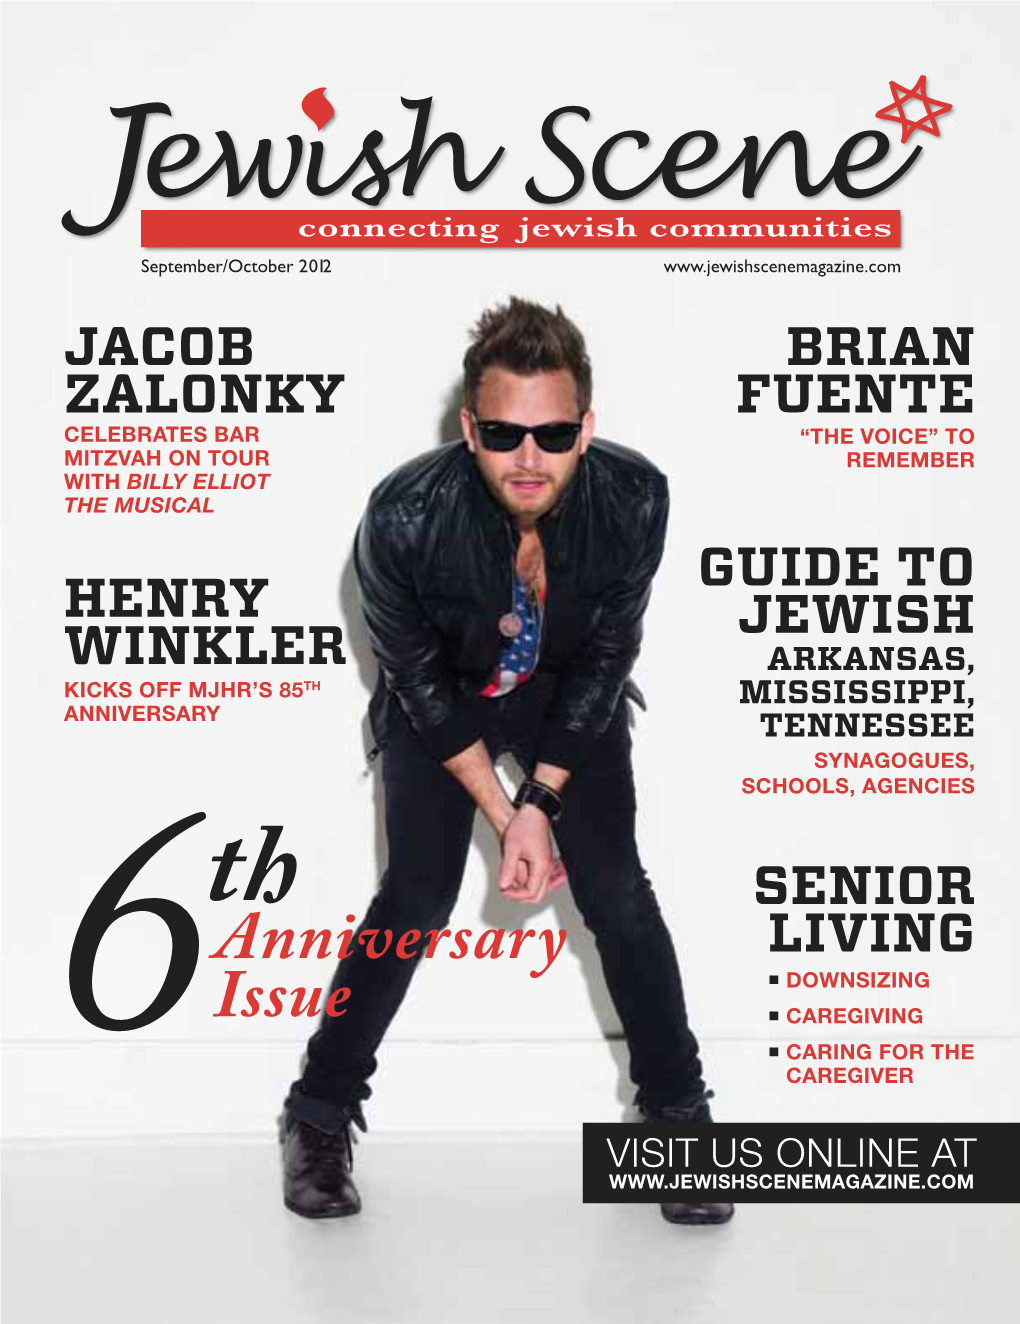 Anniversary Issue Features Our Annual Guide to Jewish Arkansas, Mississippi, Tennessee and Senior Living Sections